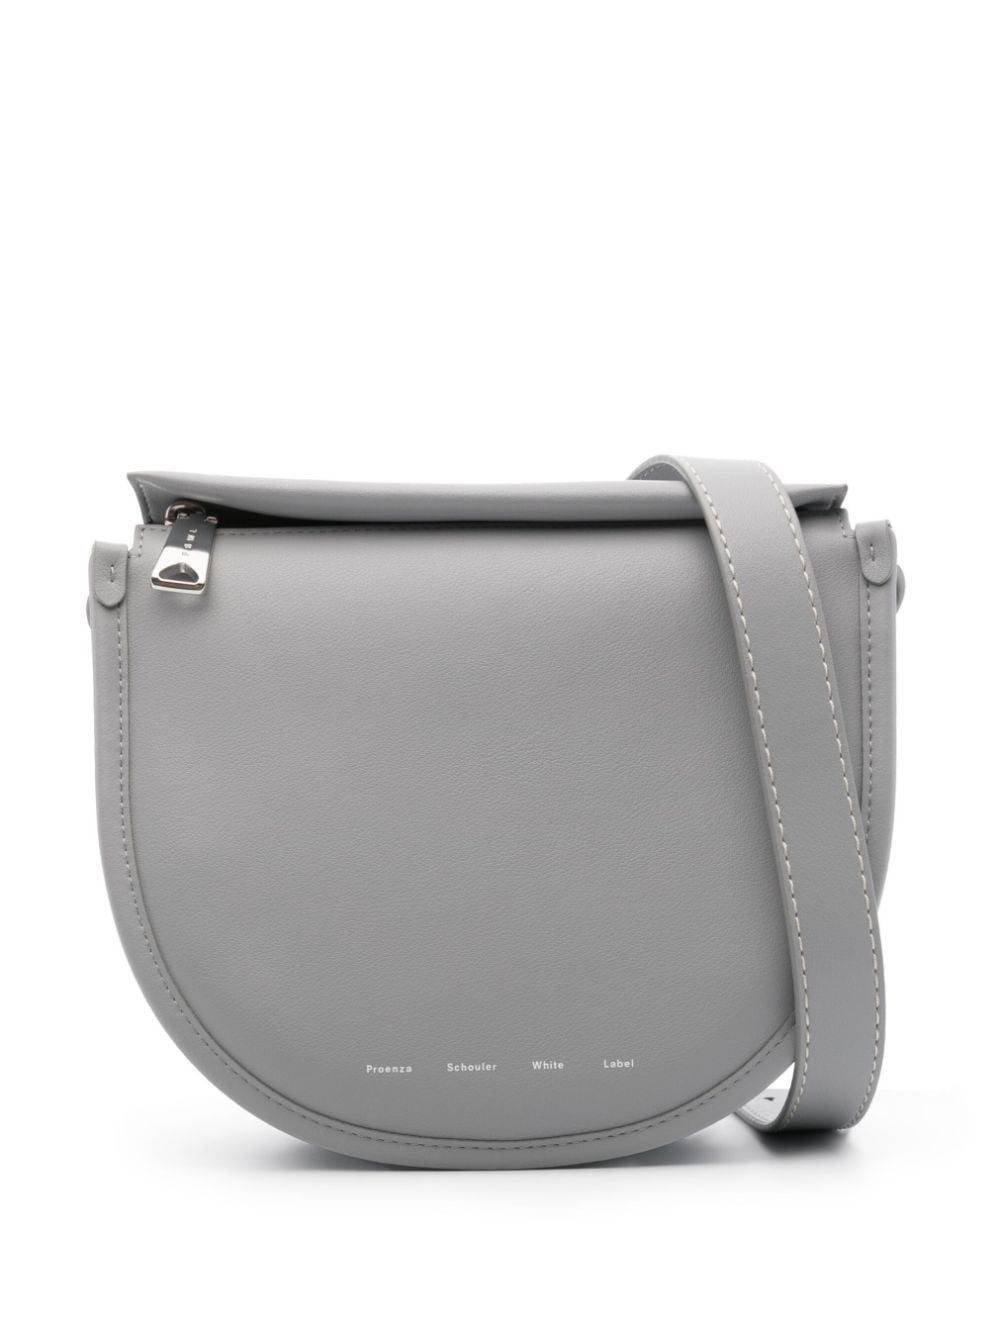 Proenza Schouler White Label Medium Baxter Leather Bag In Gray